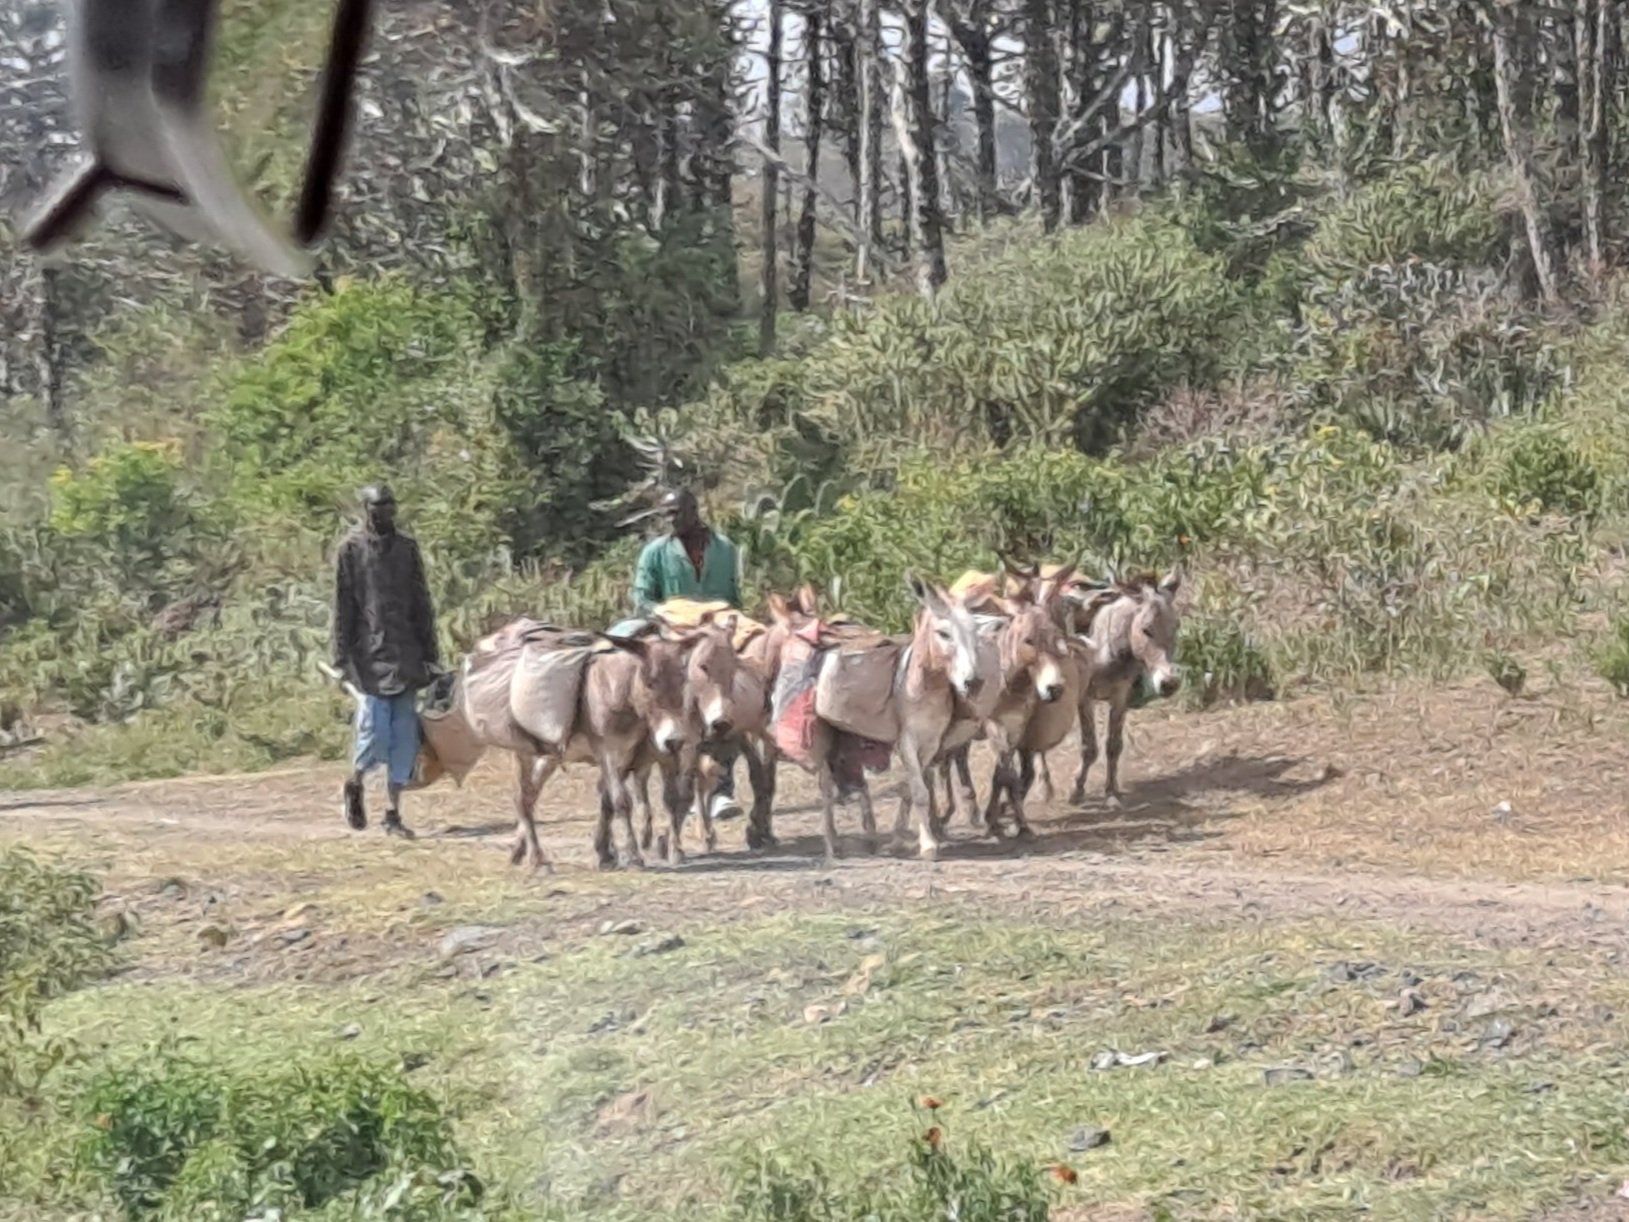 Donkeys Carrying Bags